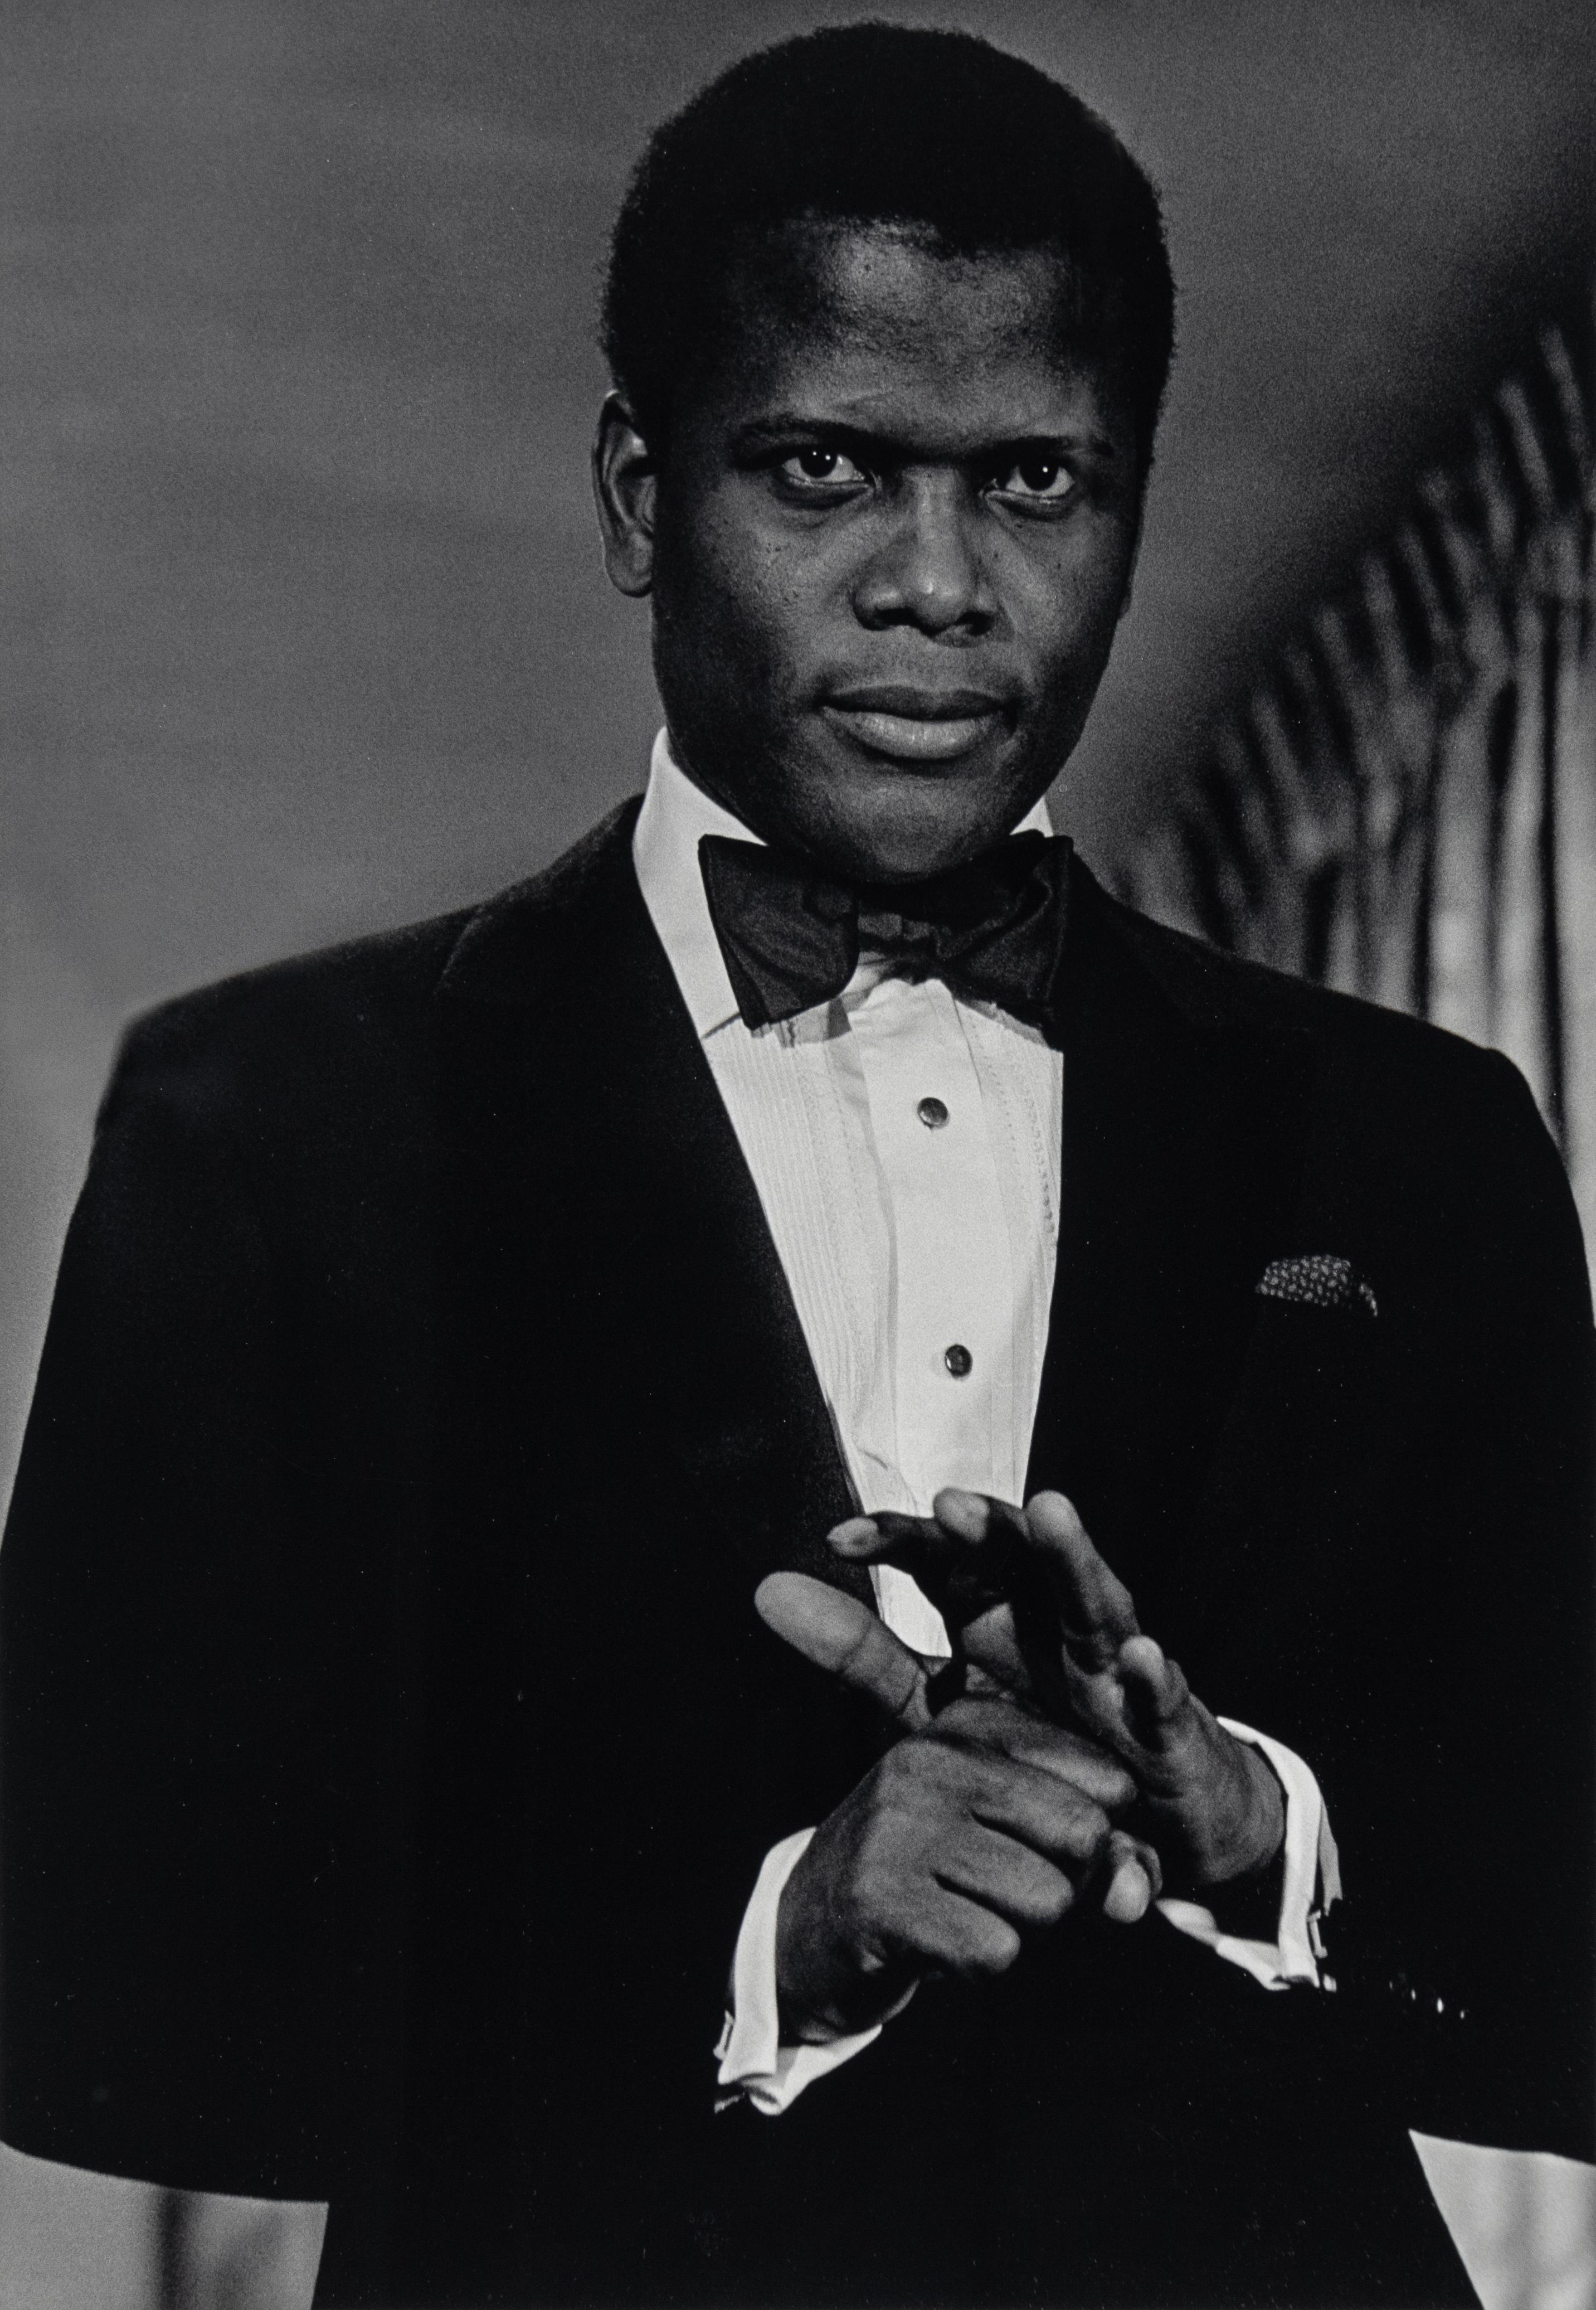 Sidney Poitier at the Oscars Where He Won Best Actor - Photograph by Bob Adelman